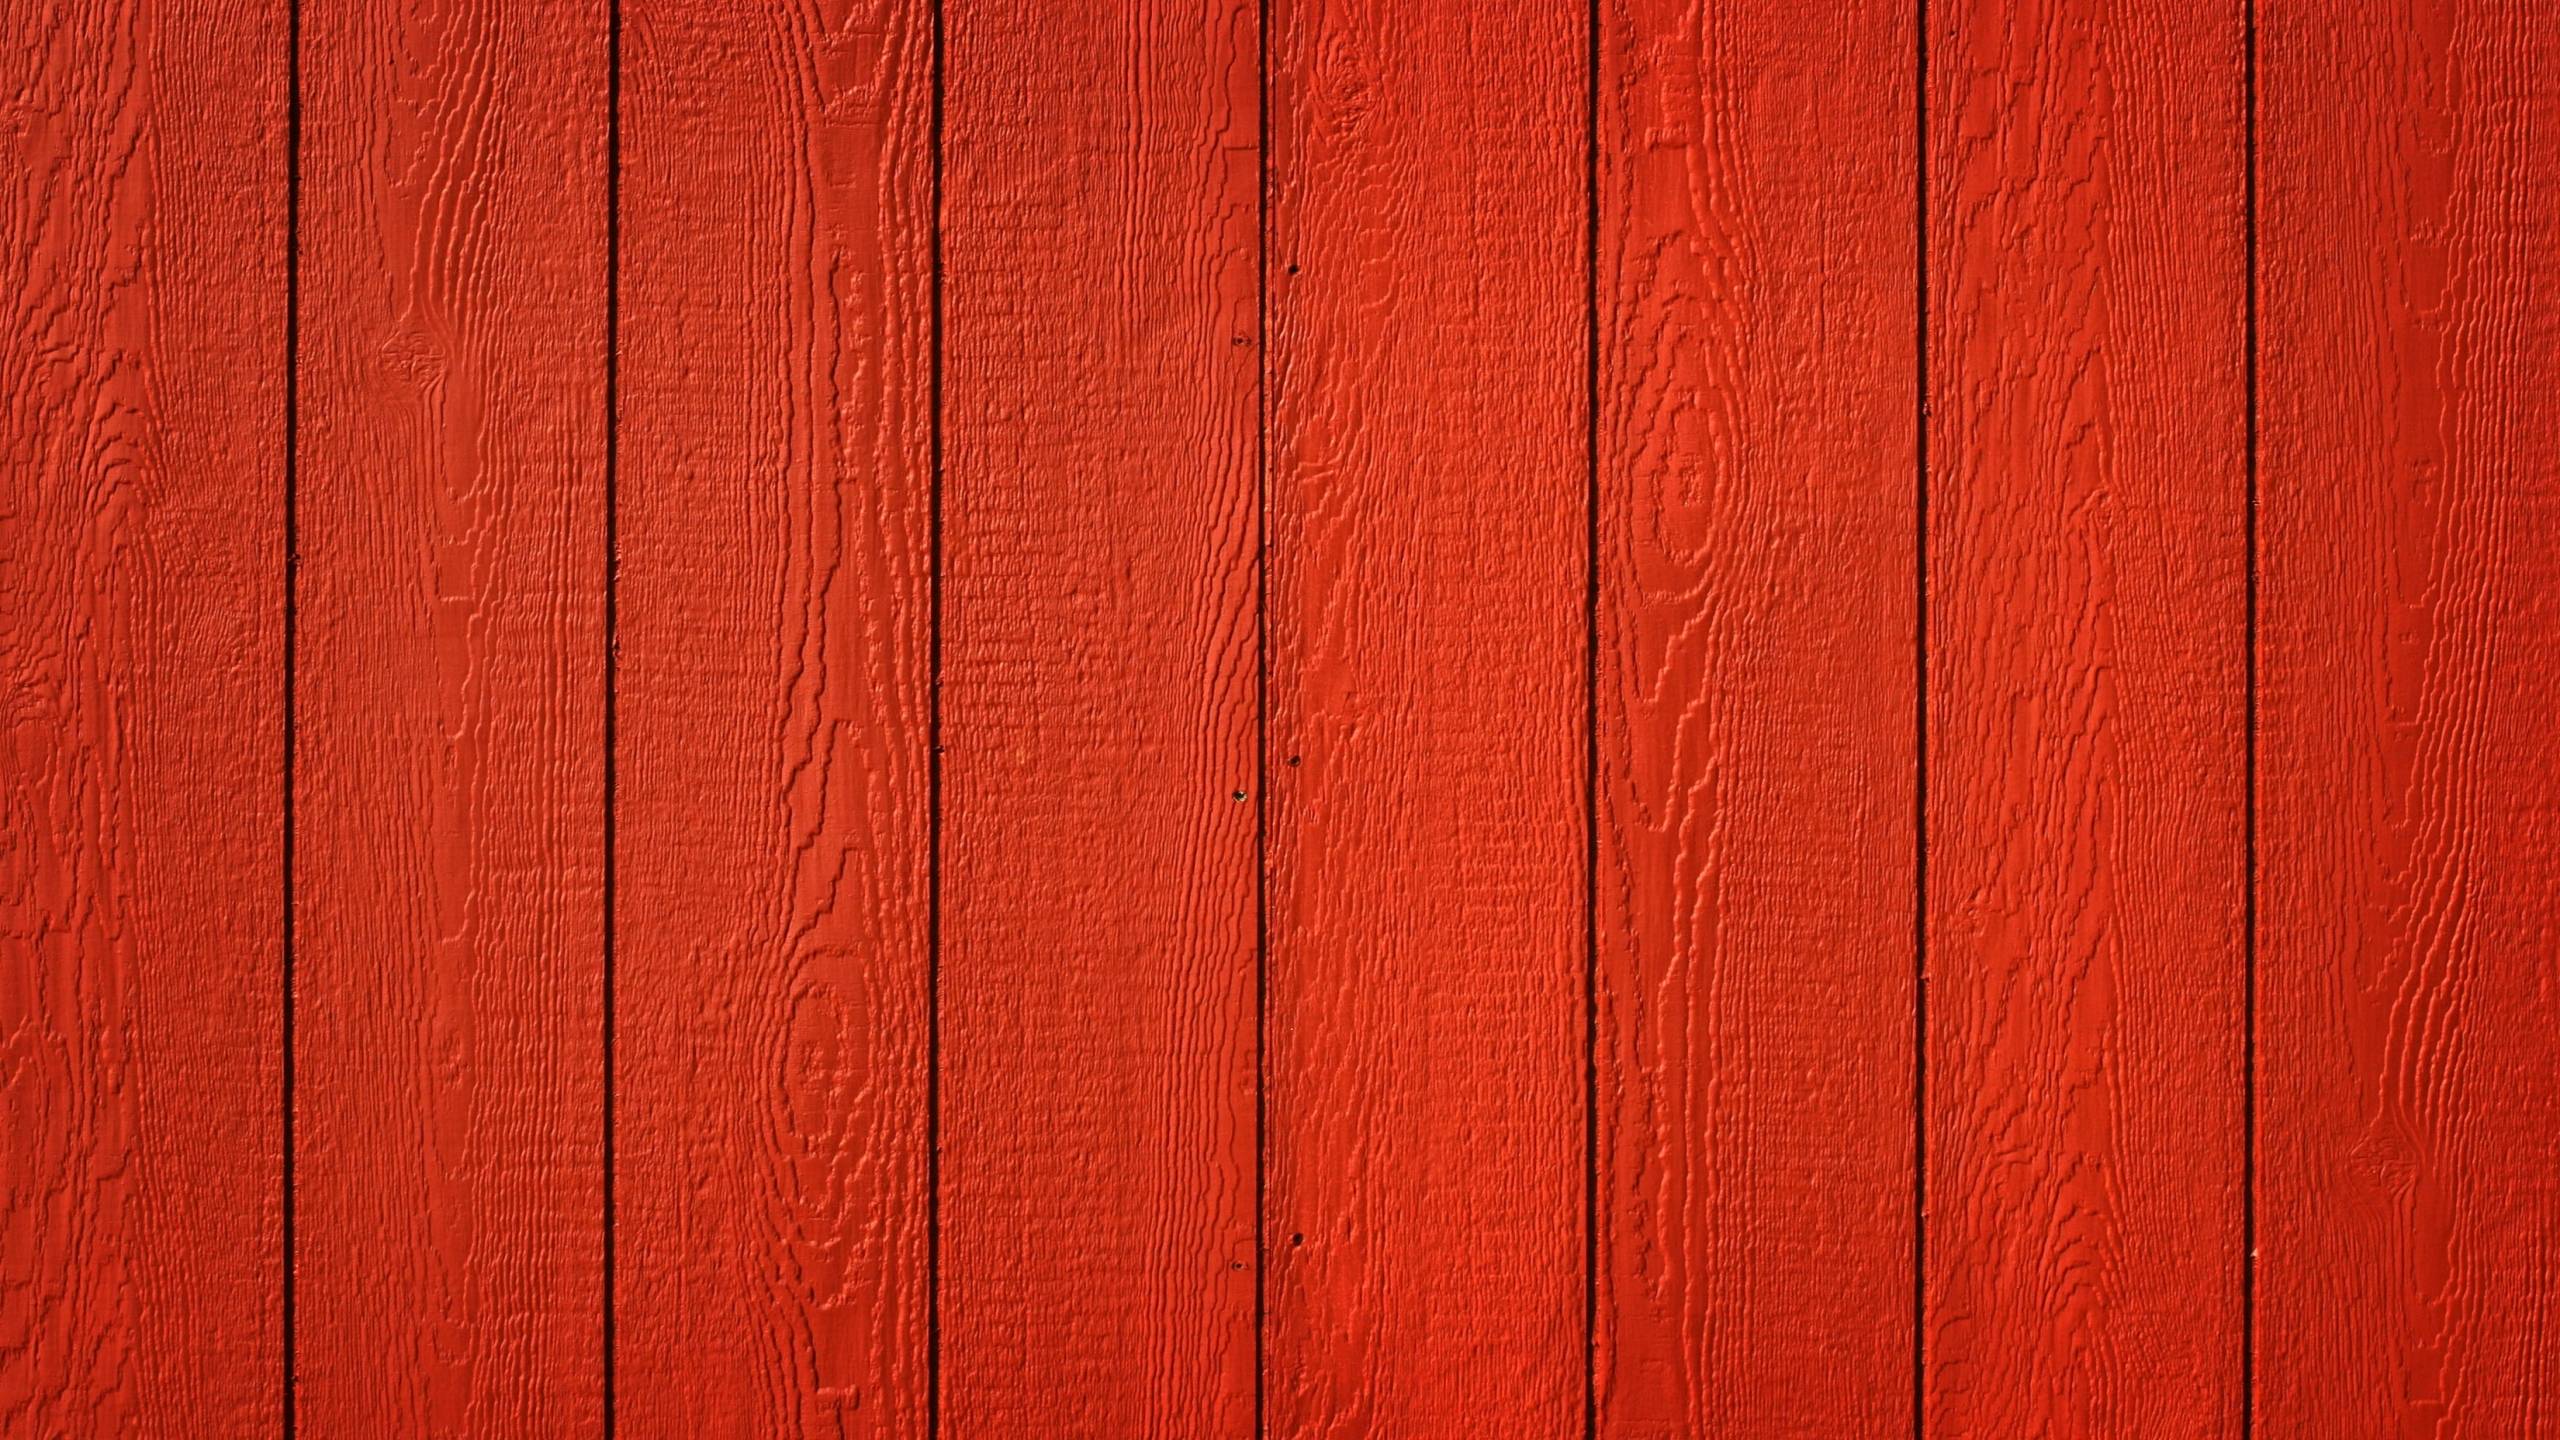 Download 2560x1440 Resolution of high quality free texture red